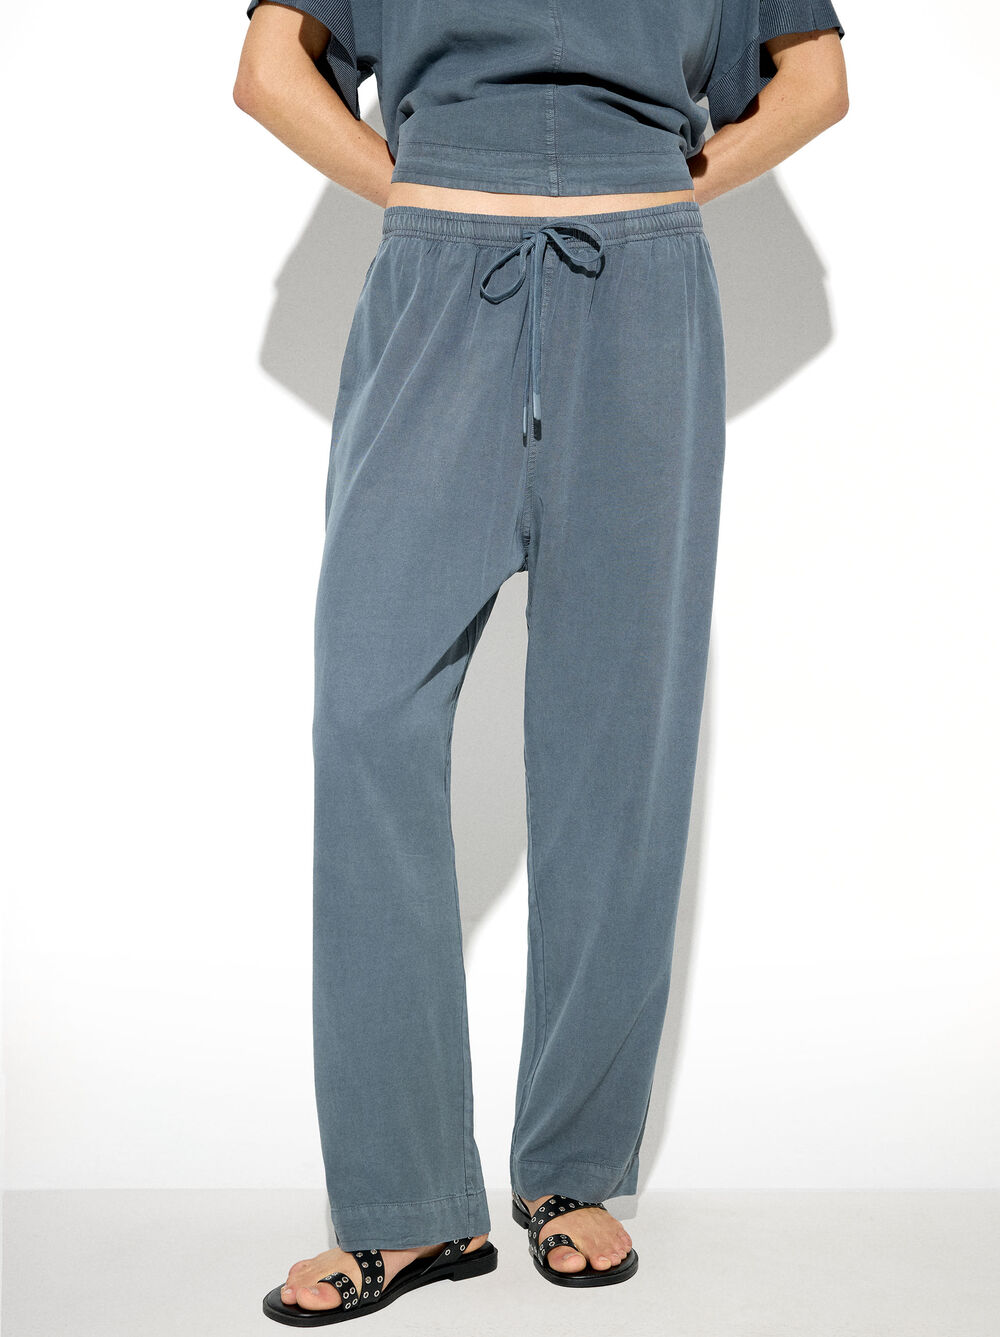 Adjustable Loose-Fitting Trousers Pants With Drawstring image number 1.0